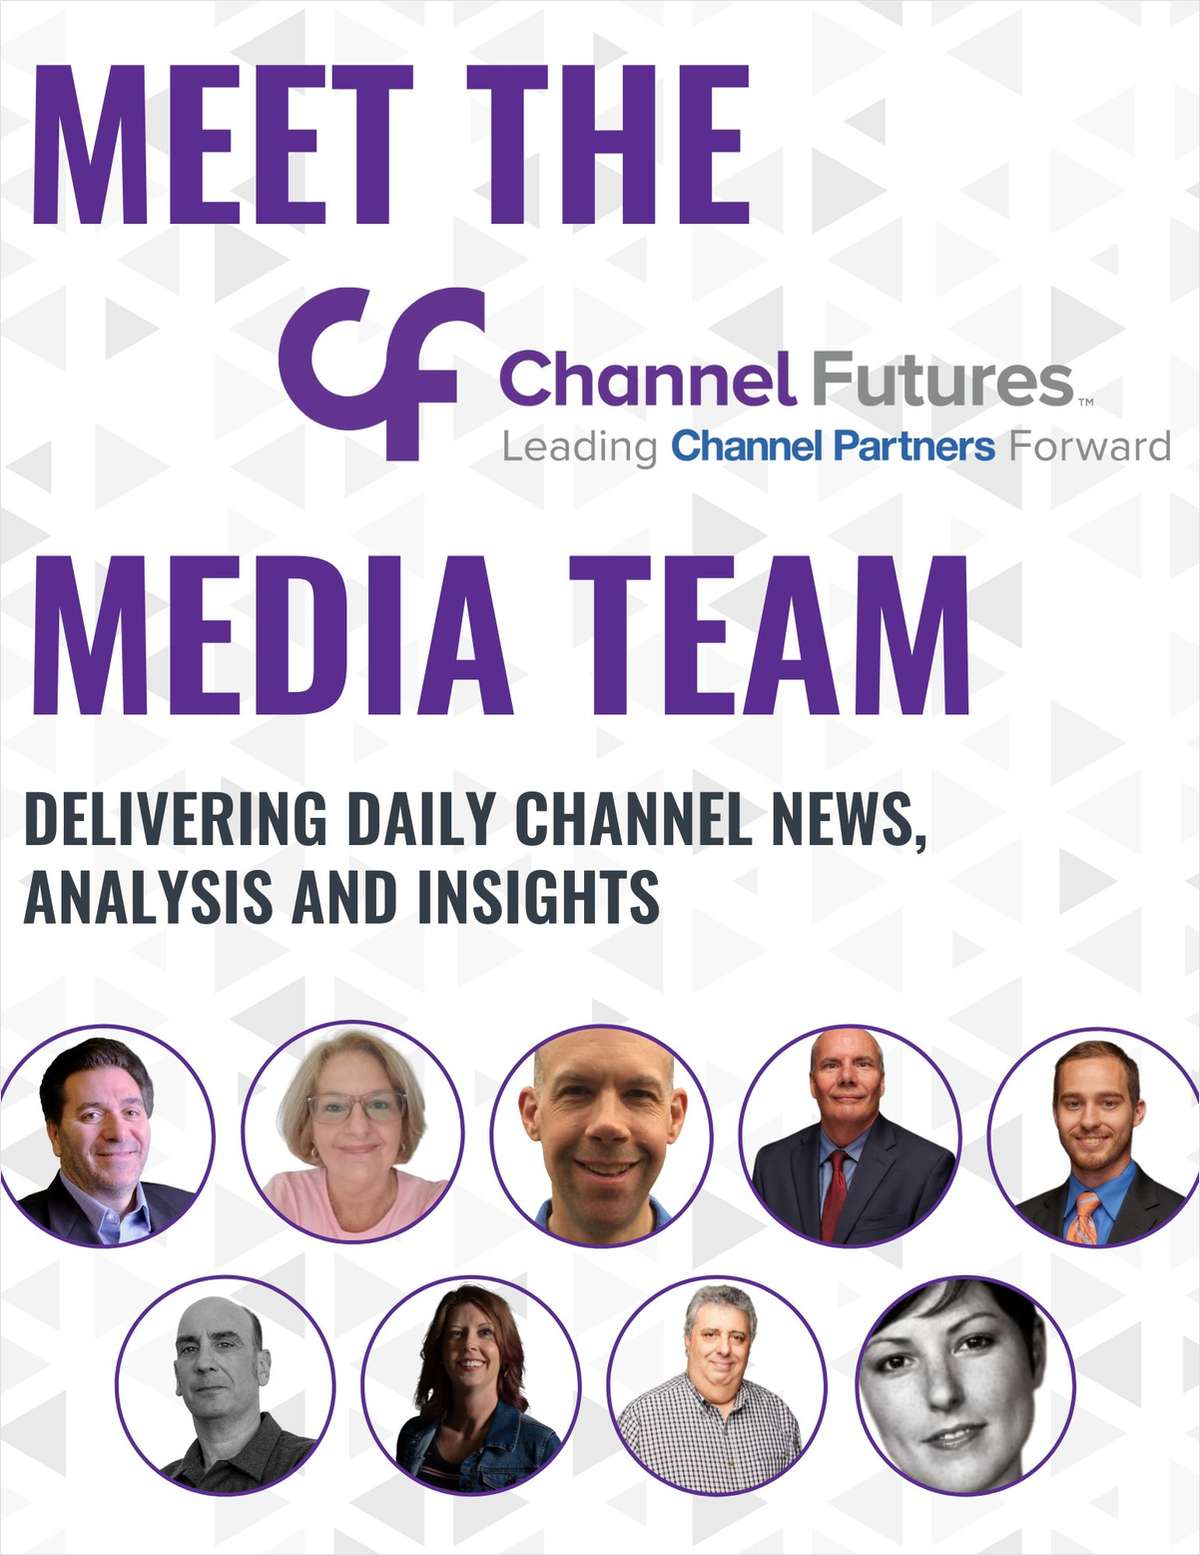 Meet the Channel Futures Media Team